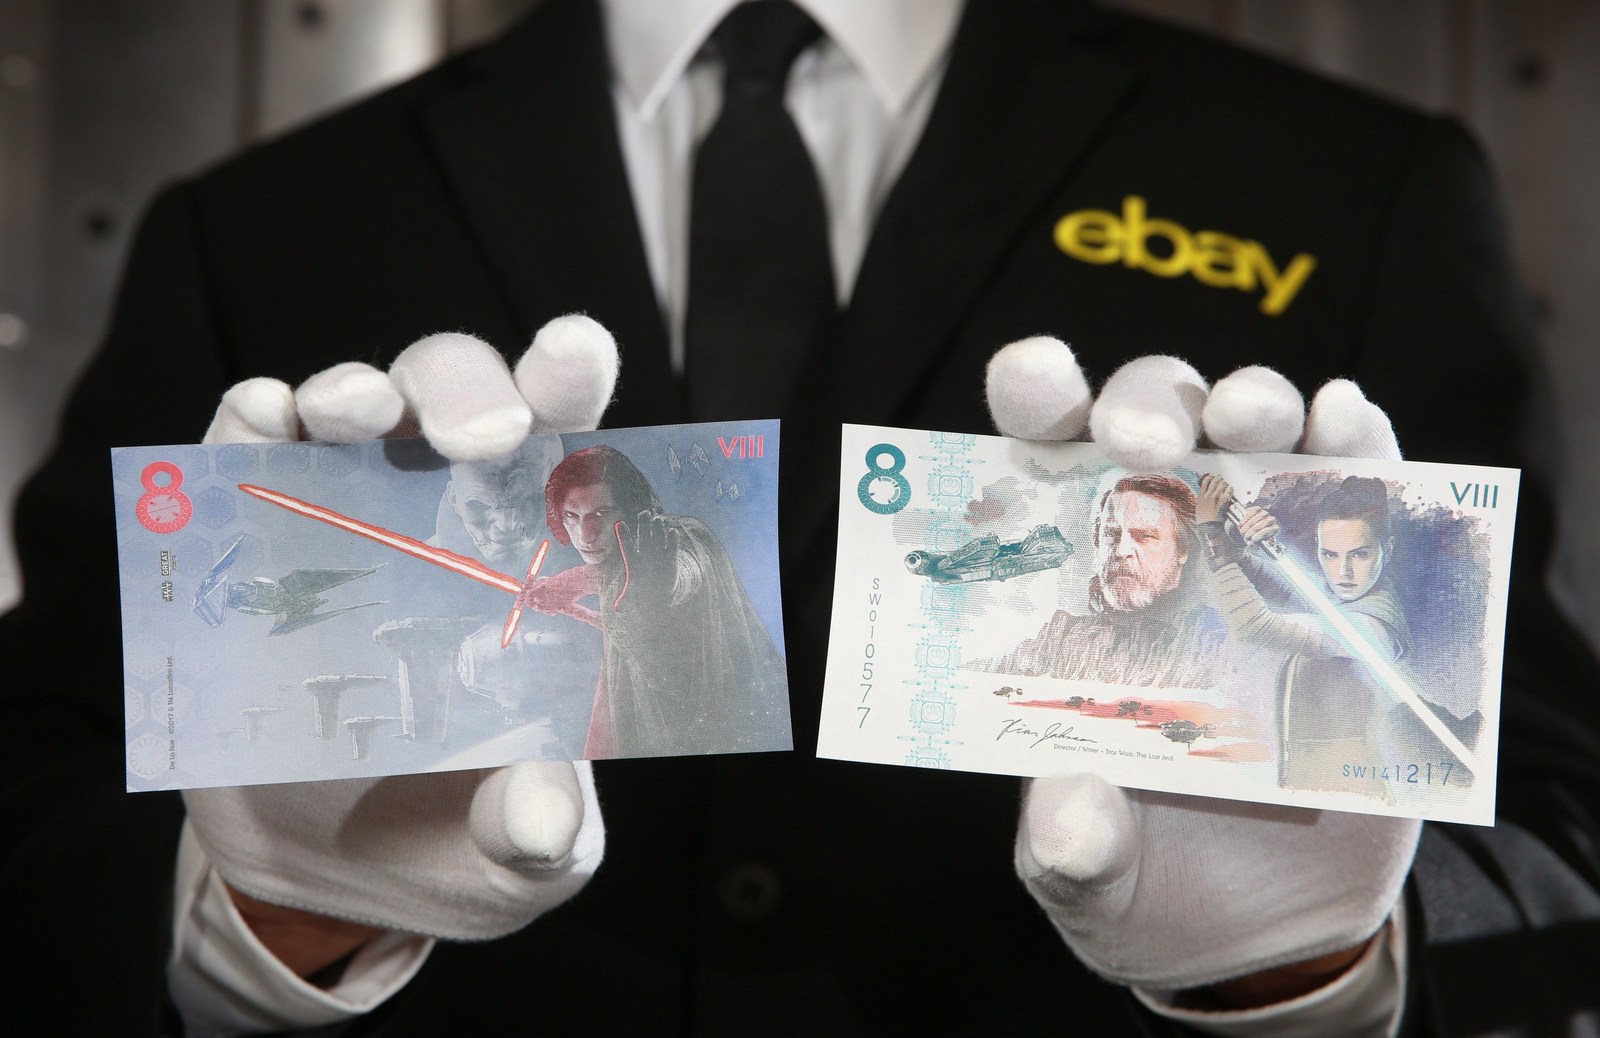 eBay and De La Rue launch an official commemorative note for charity on December 7th, to mark the upcoming film release of Star Wars: The Last Jedi